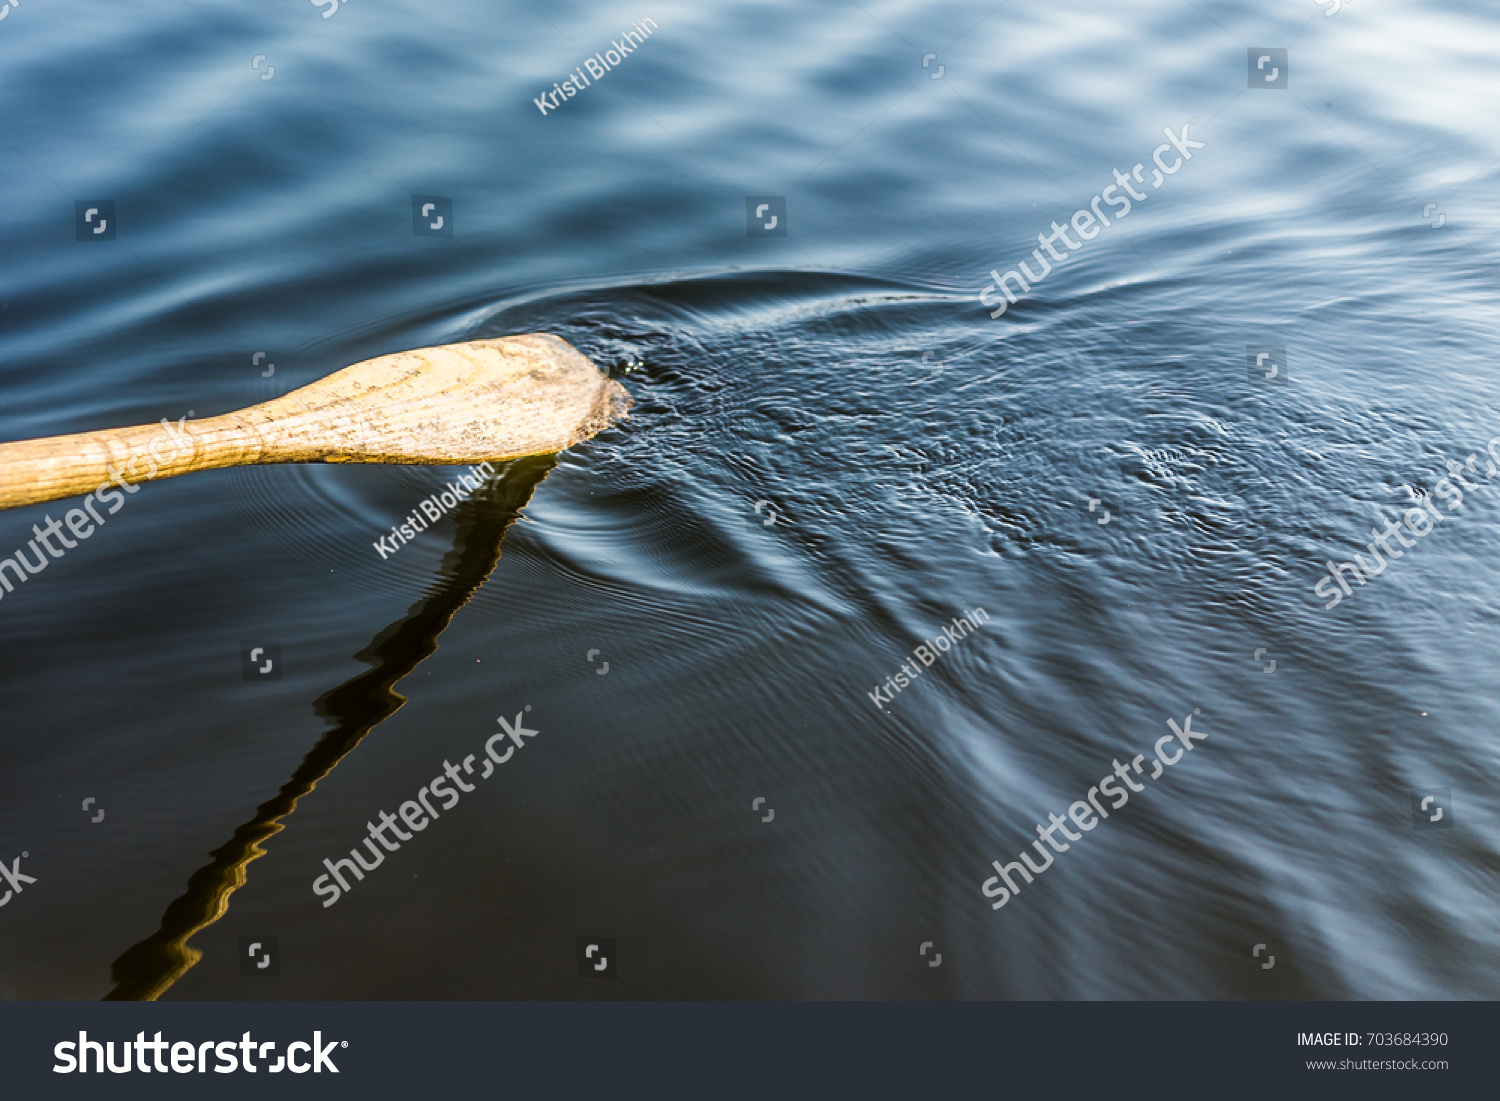 Closeup of oar paddle from row boat moving in water on green lake with ripples #703684390